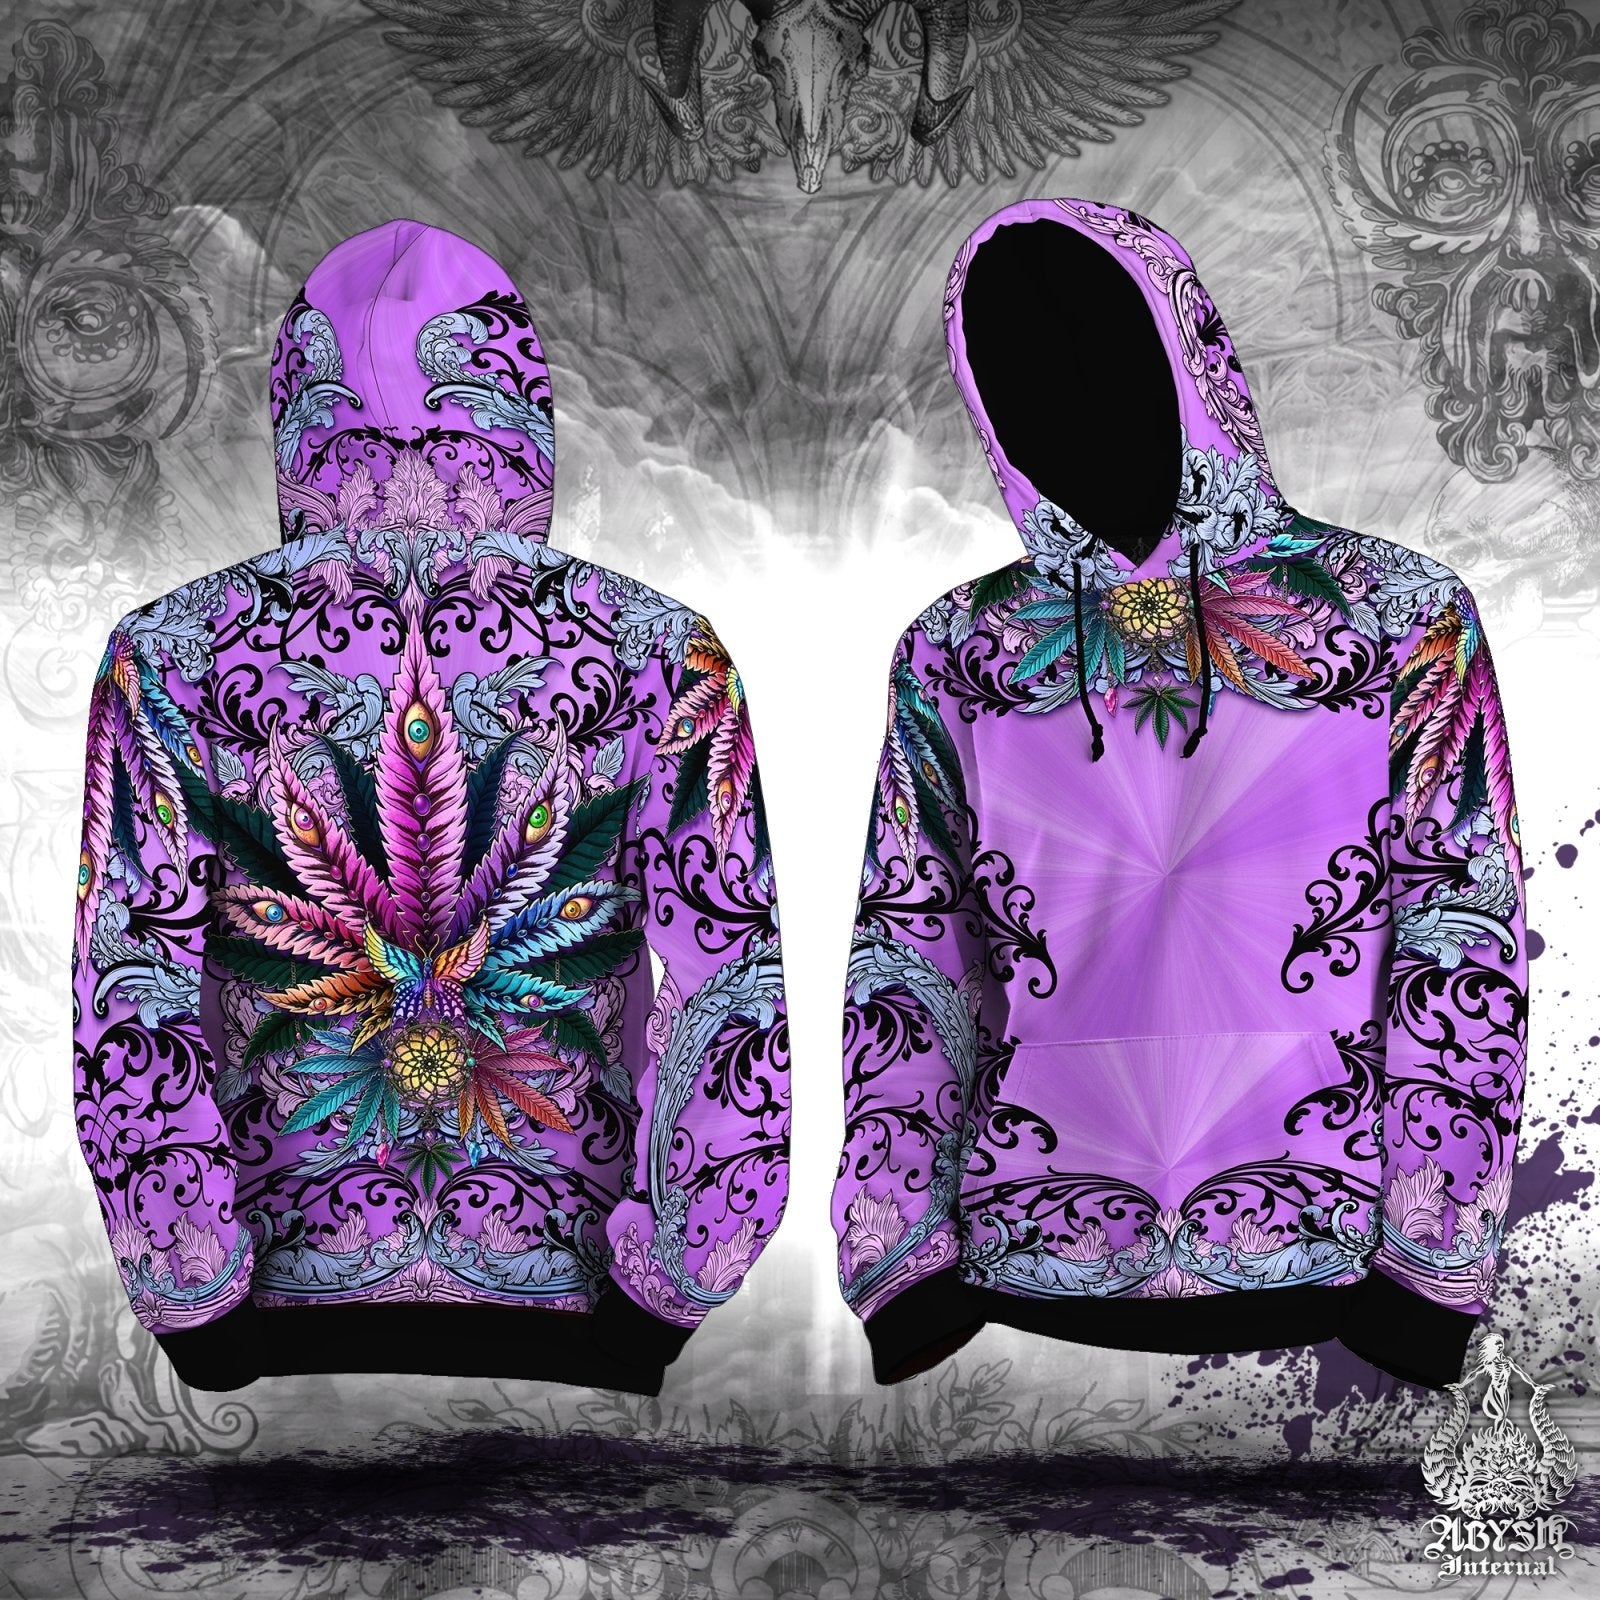 Cannabis Hoodie, Weed Festival Clothes, Trippy Outfit, Hippie Streetwear, Alternative Clothing, Unisex, 420 Gift - Marijuana, Pastel Goth and Black - Abysm Internal